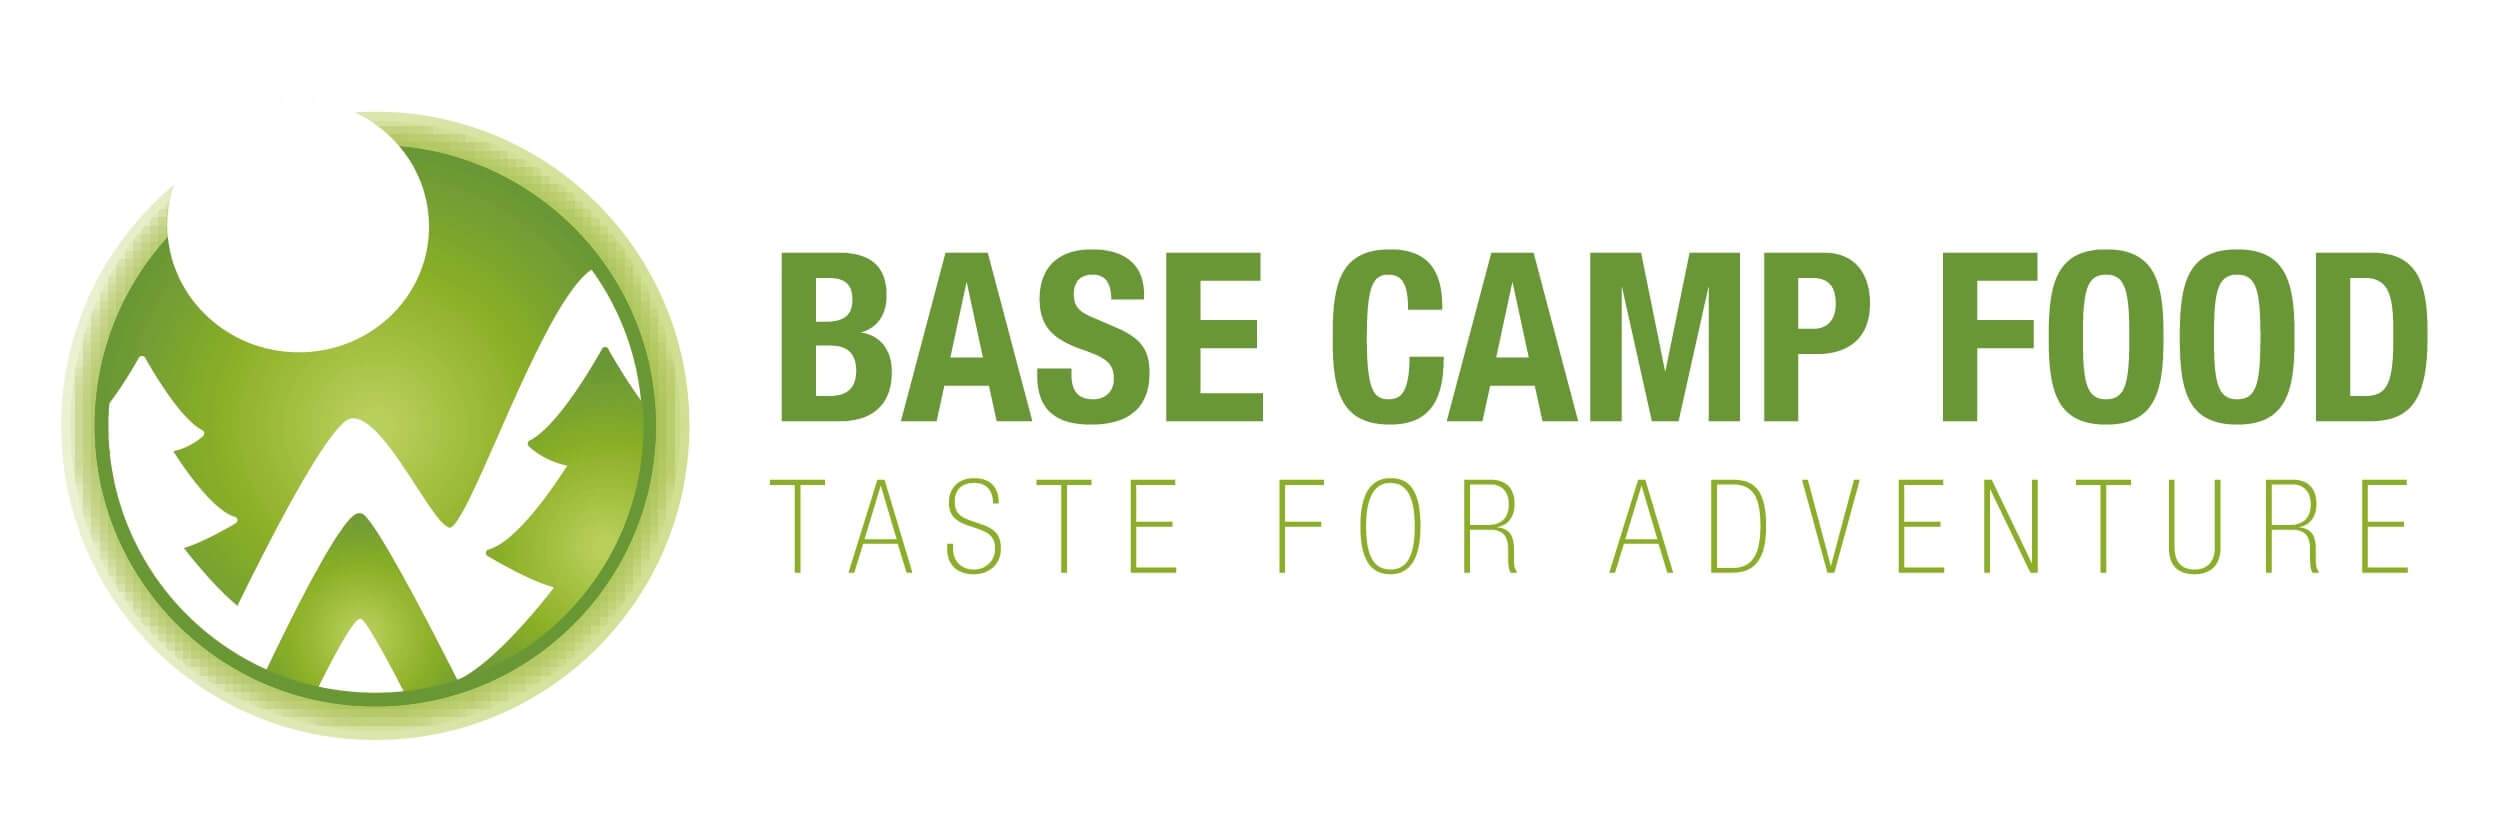 Food.com Logo - Base Camp Food: lightweight, expedition freeze dried meals and stoves